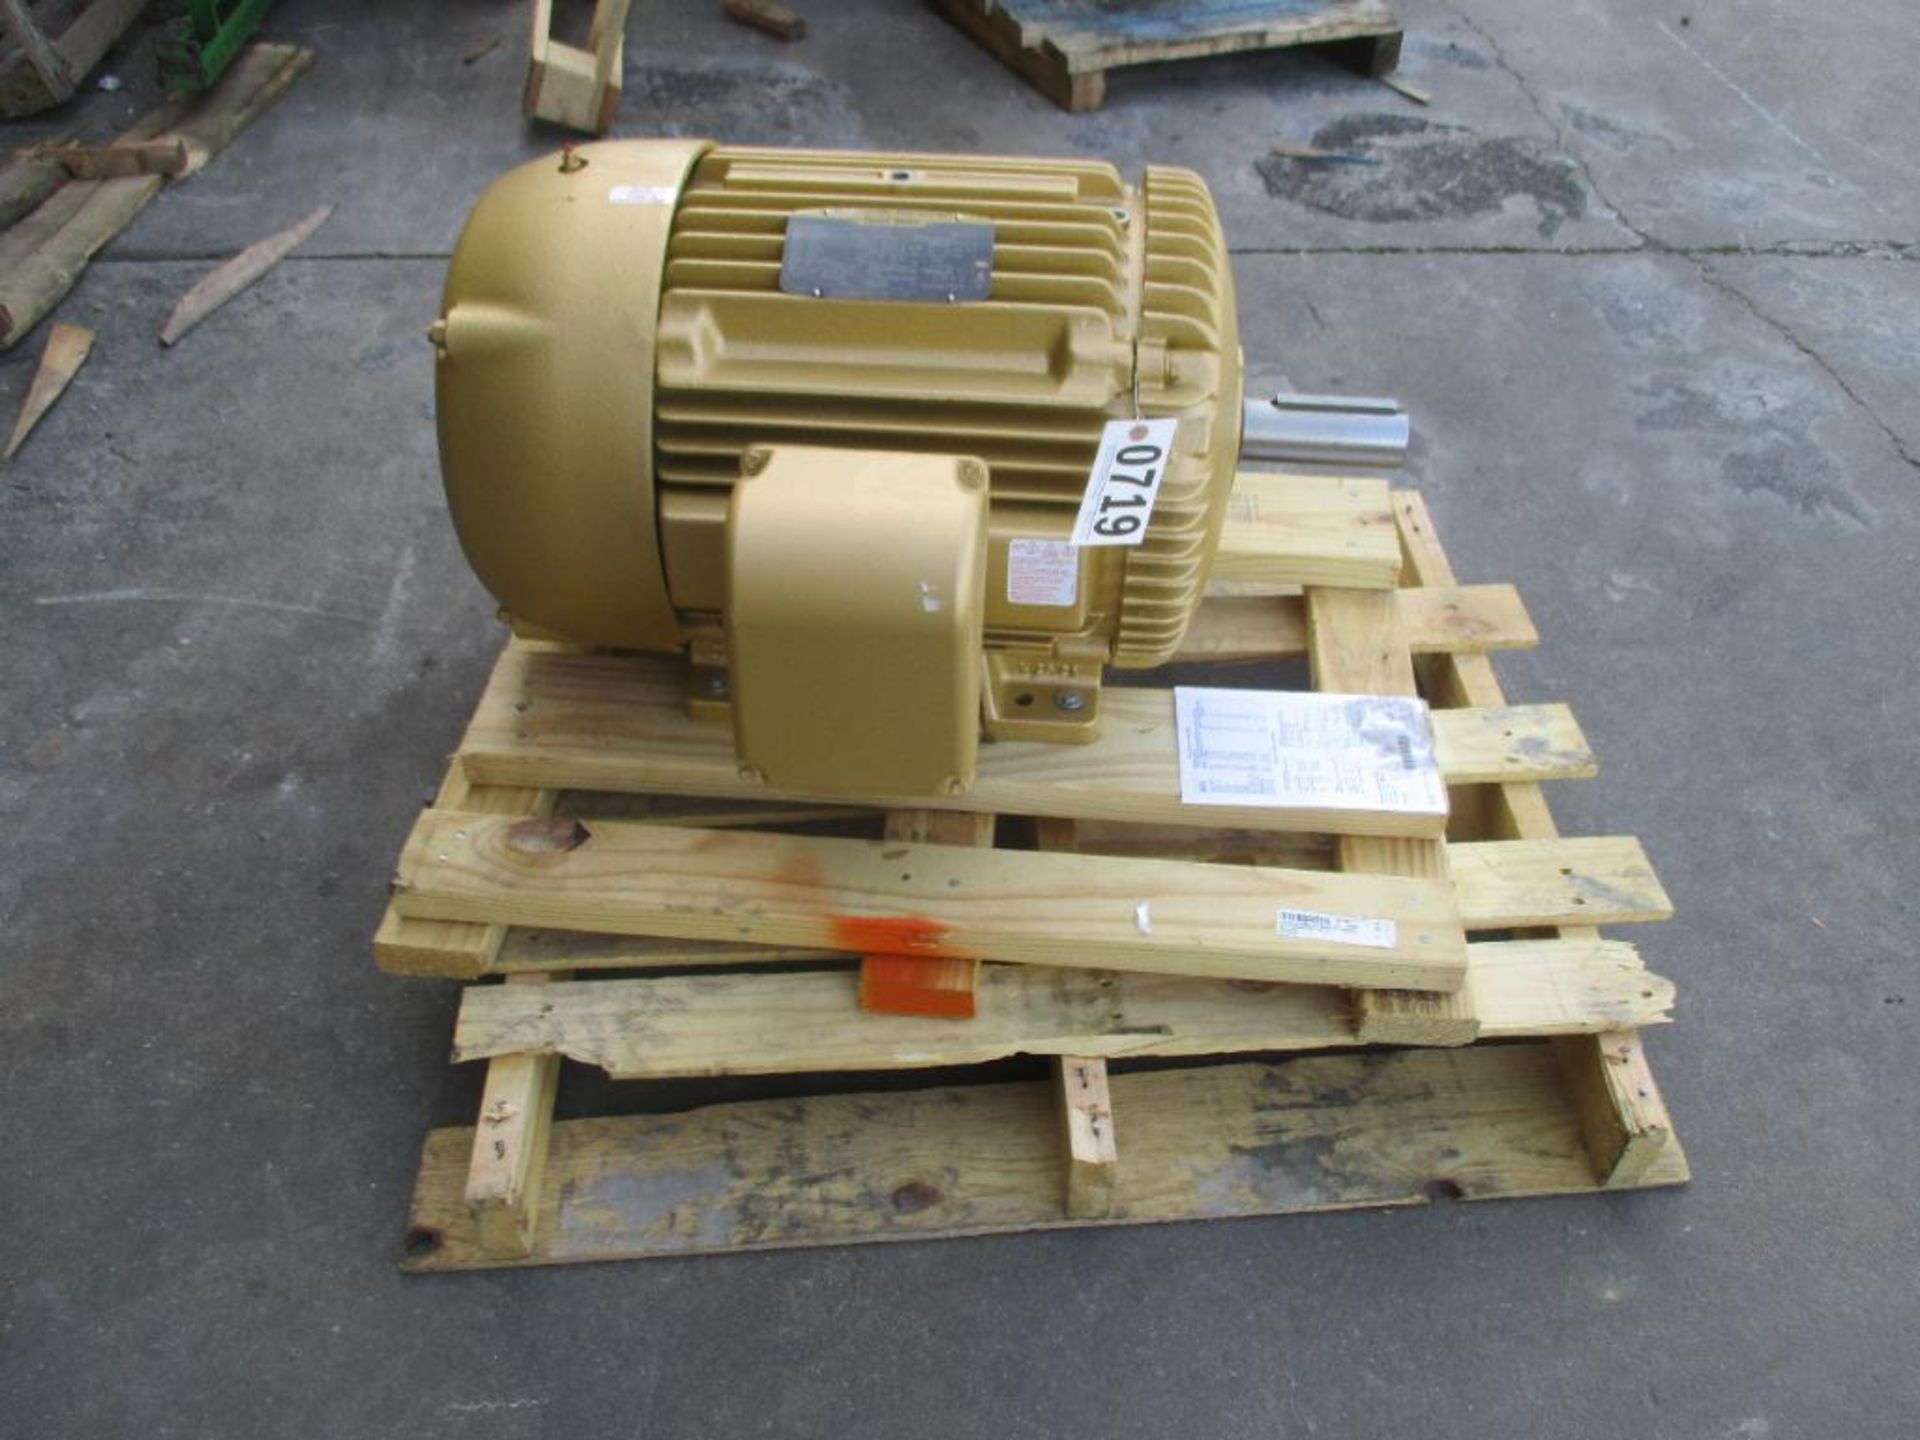 BALDOR 3 PHASE 40HP 1775RPM 324T FRAME A/C MOTOR P/N EM4110T 585# LBS (THIS LOT IS FOB KNOXVILLE TN) - Image 3 of 5